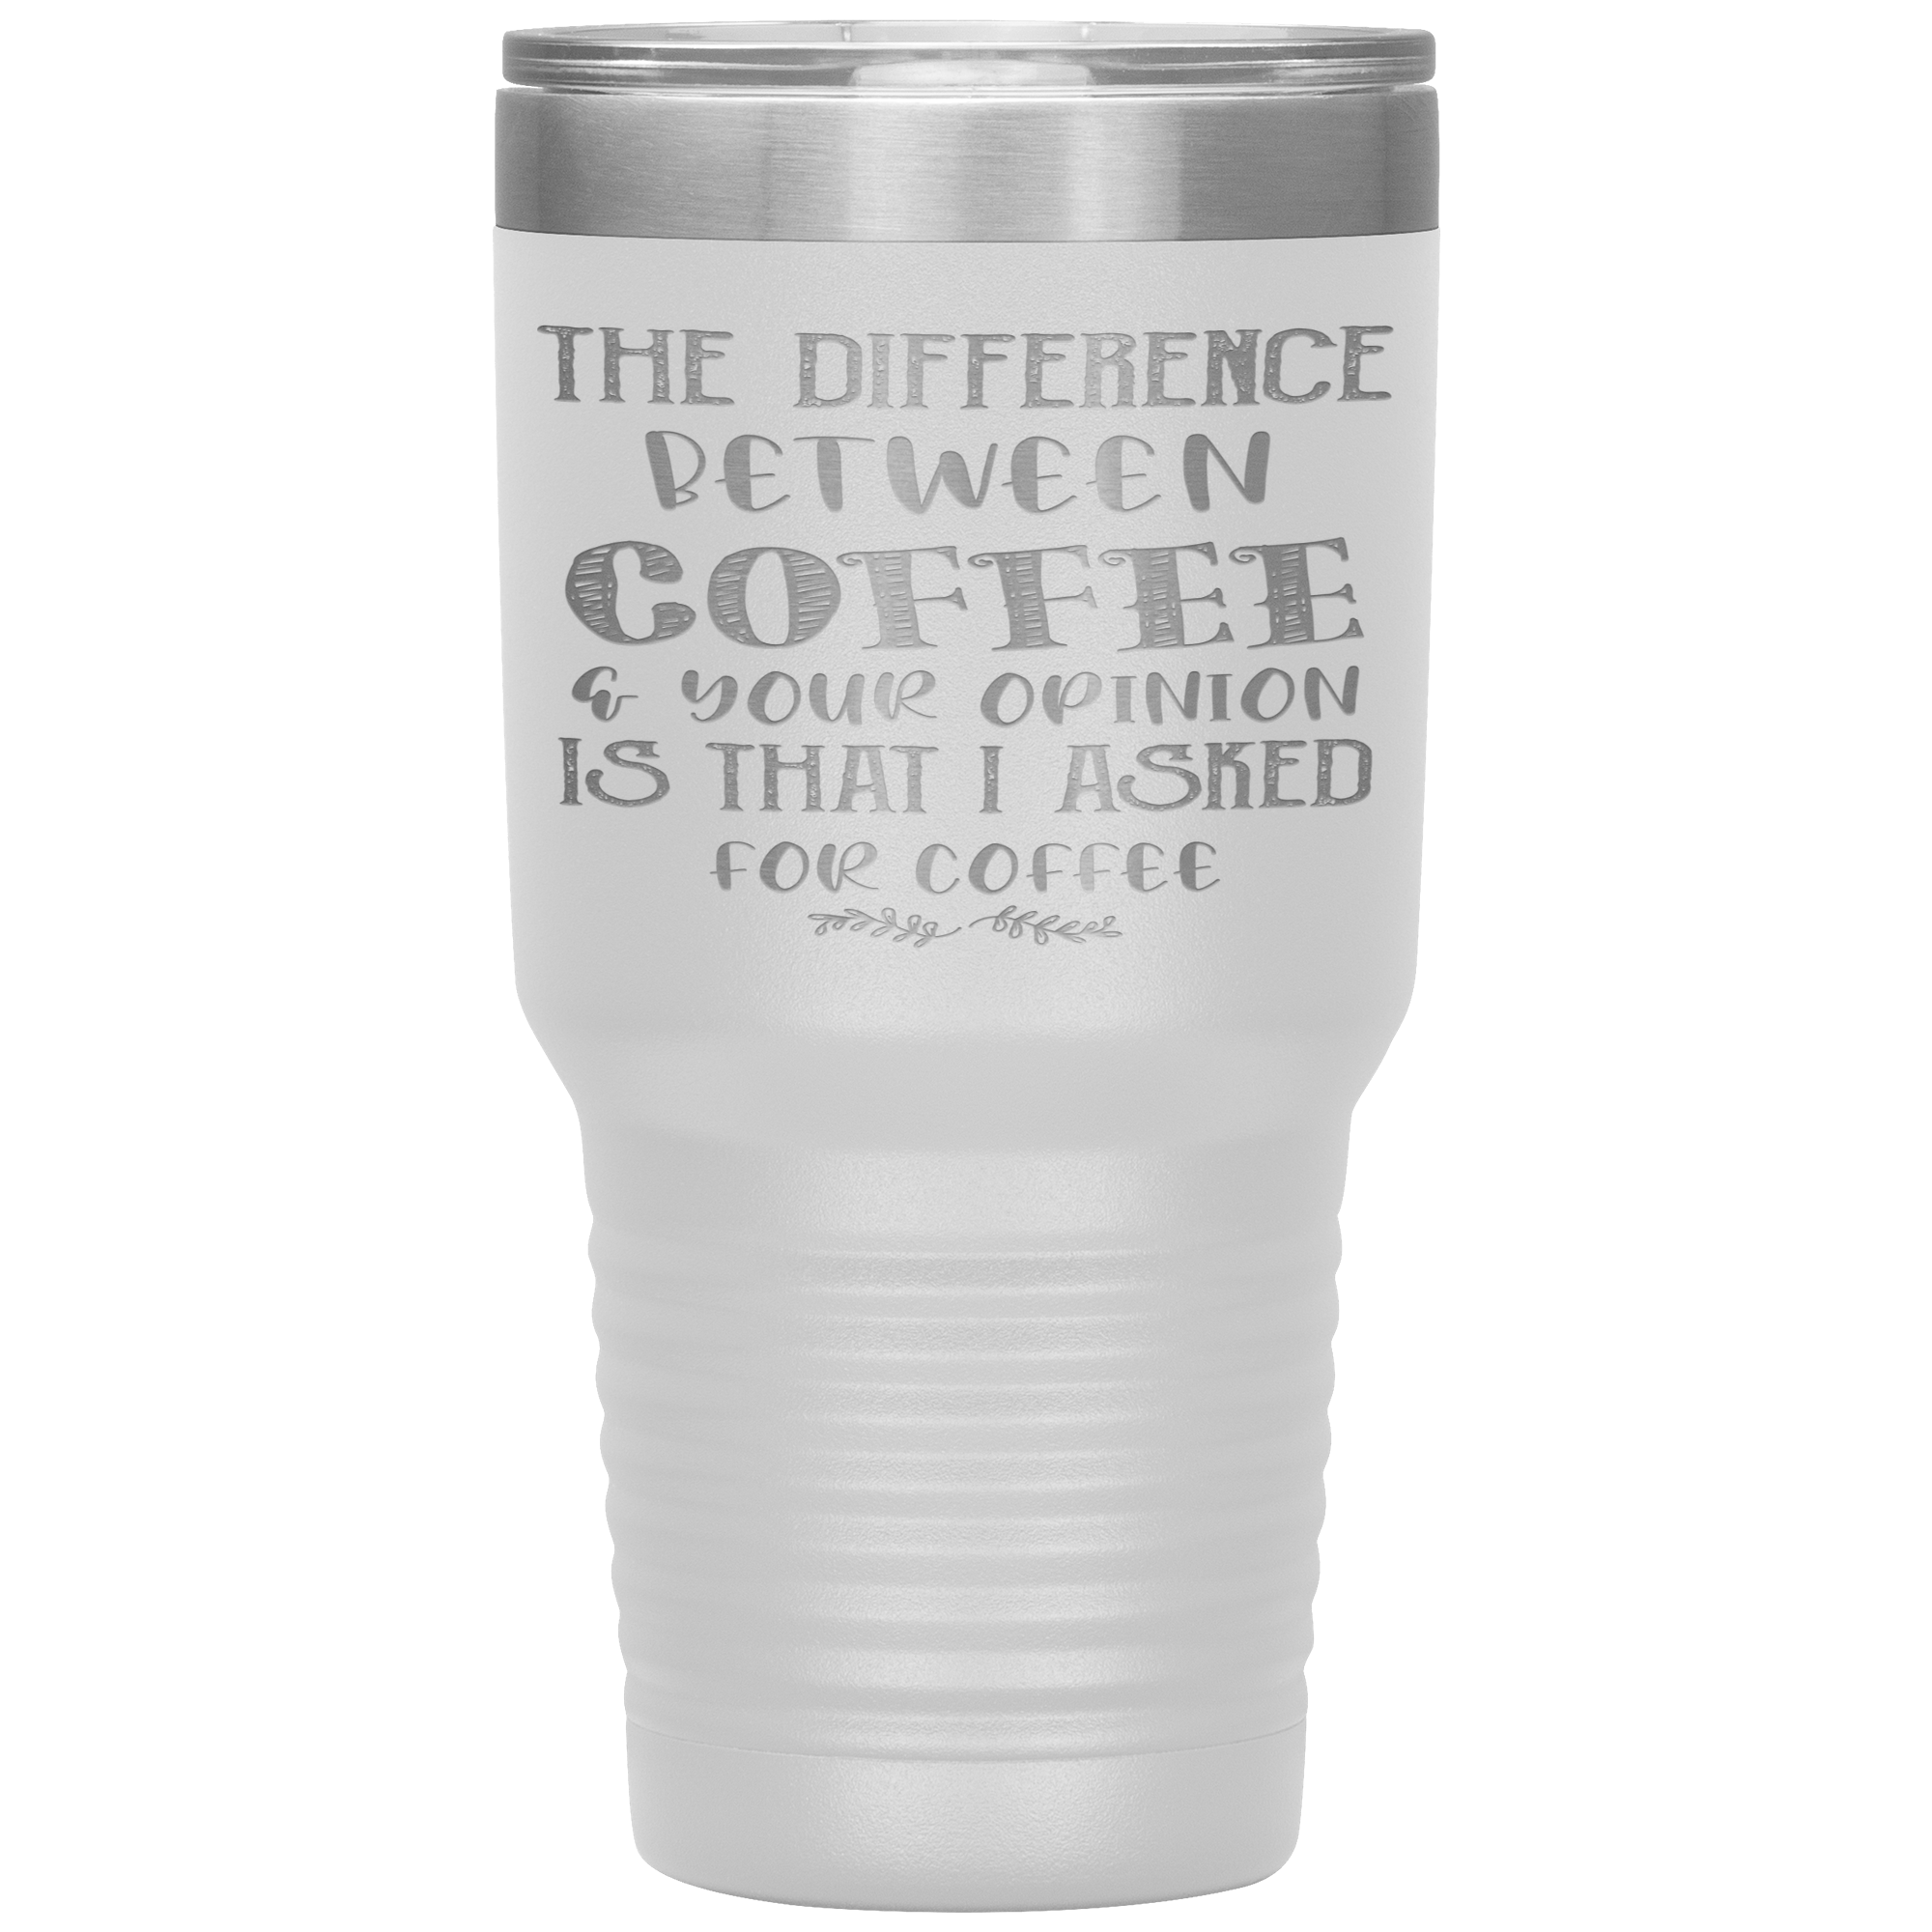 I ASKED FOR COFFEE NOT YOUR OPINION - TUMBLER